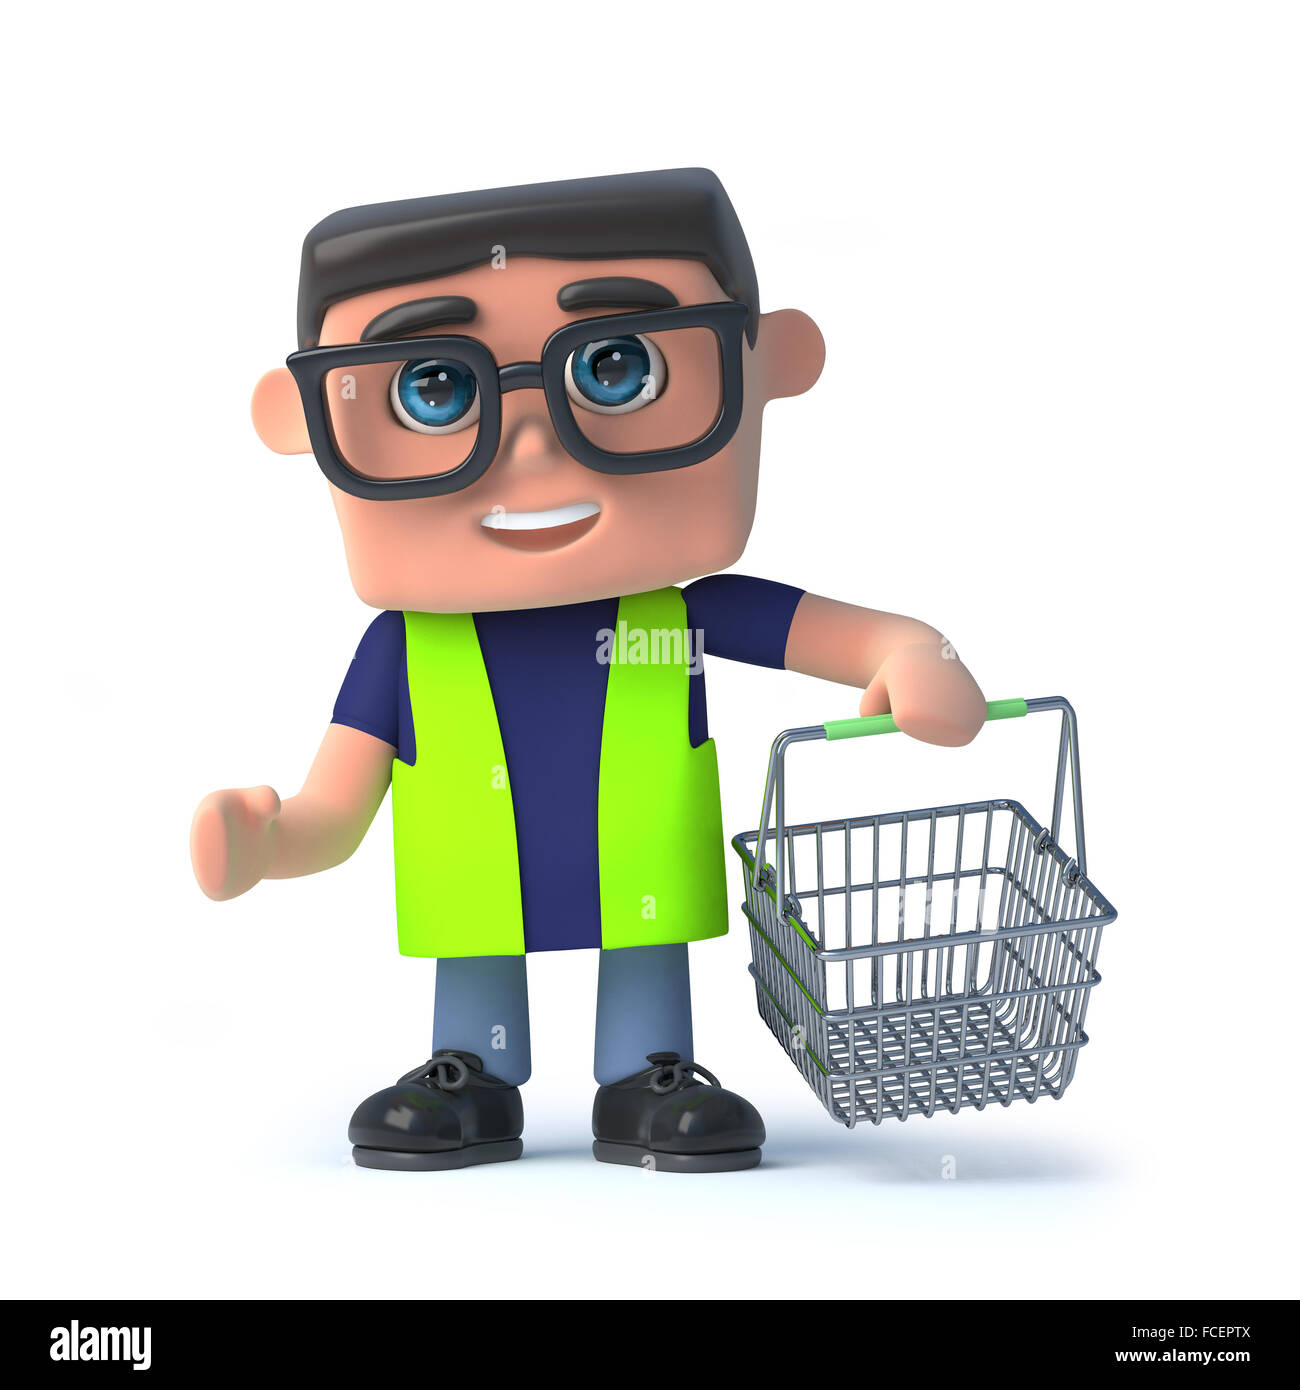 3d render of a health and safety worker carrying a shopping basket Stock Photo